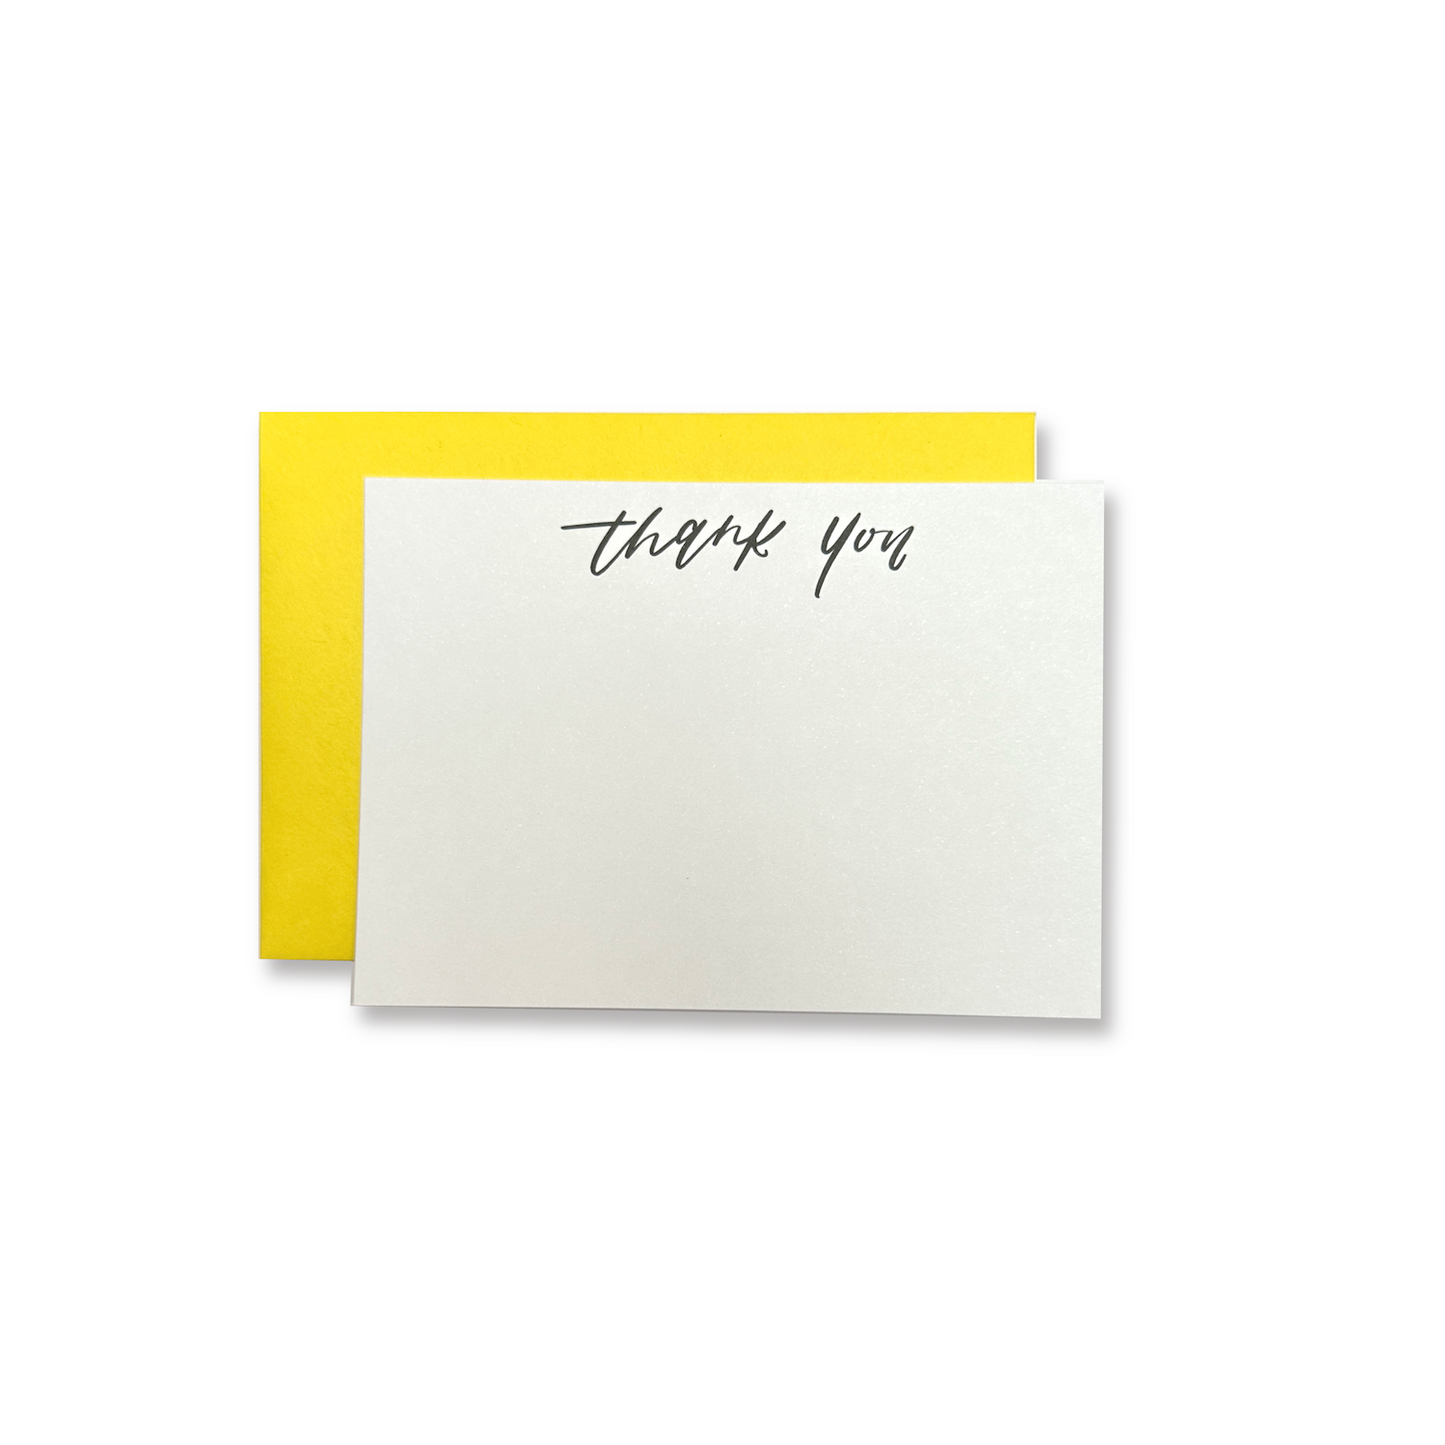 Thank You - Note Card Set